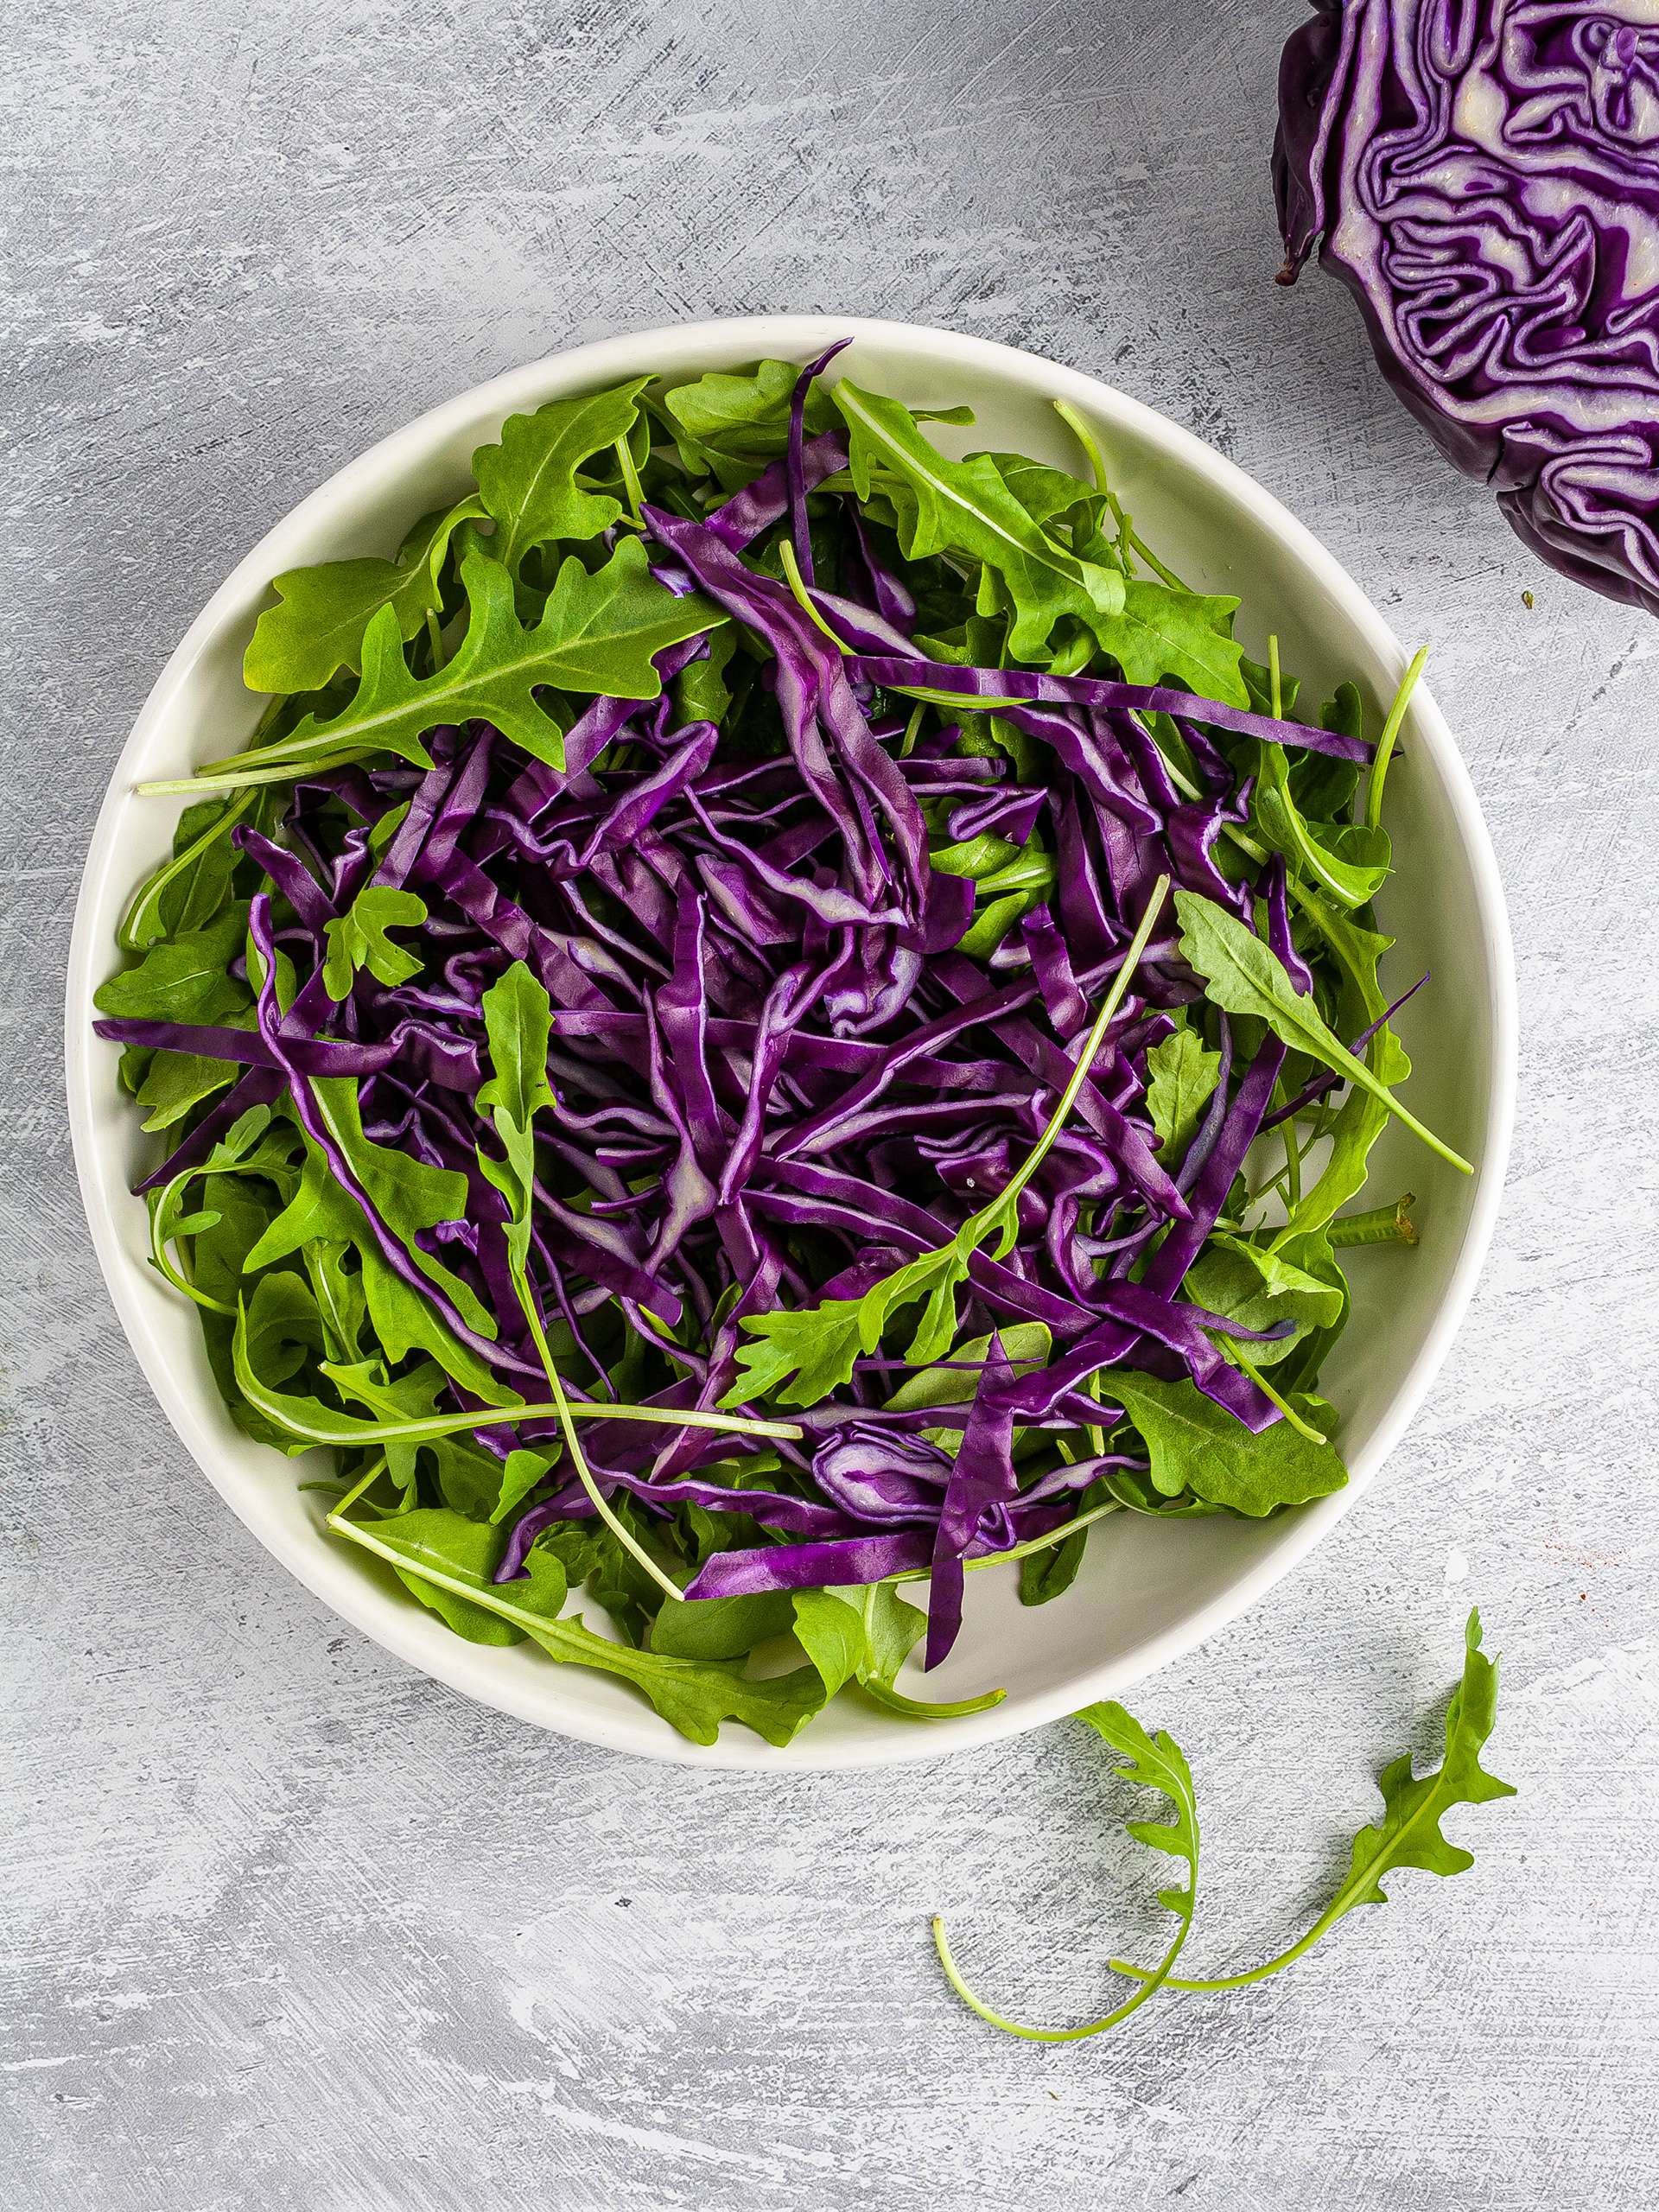 Rocket and red cabbage in a salad bowl